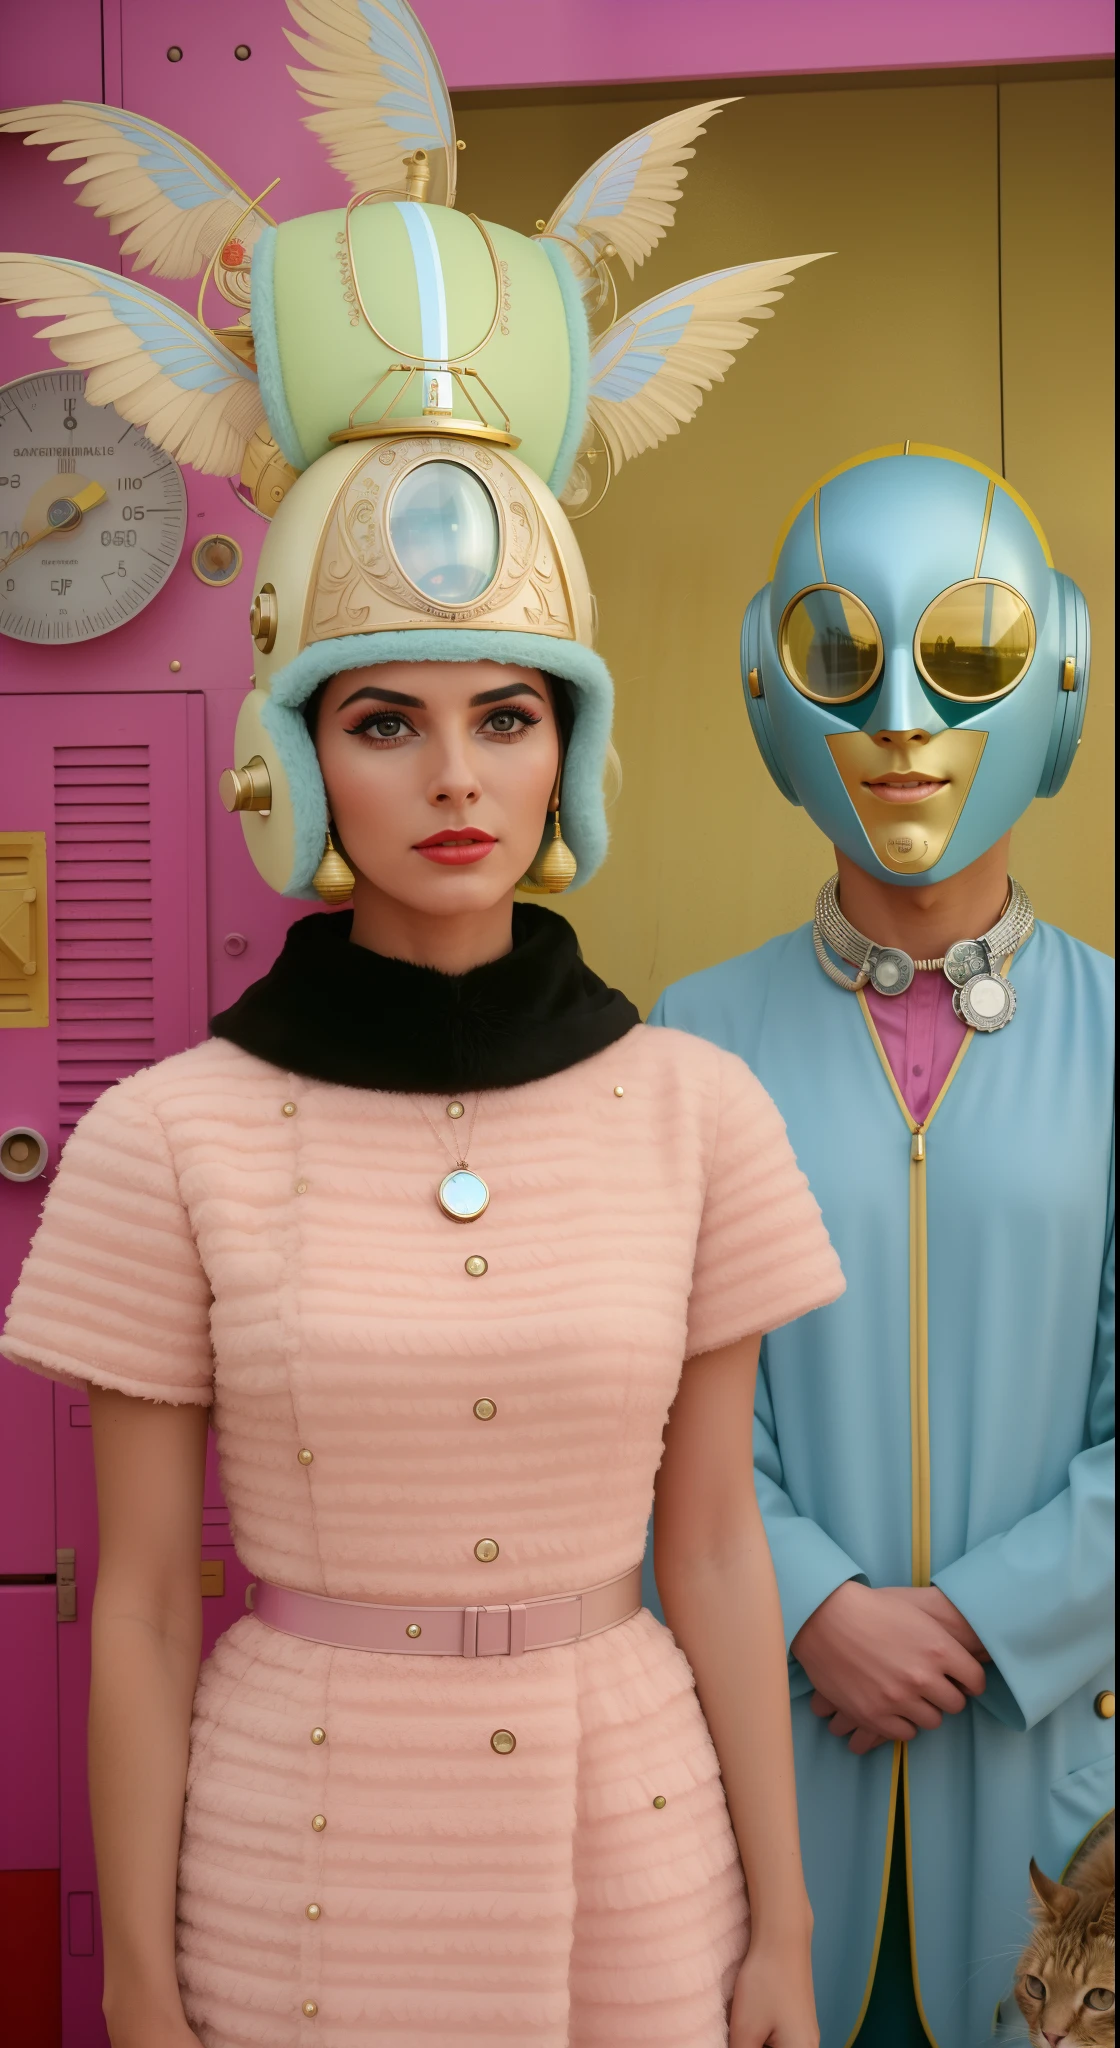 8k portrait of a 1960s science fiction film by Wes Anderson, Vogue anos 1960, pastels colors, There are people wearing futuristic animal masks and wearing extravagant retro fashion outfits and men and women wearing alien makeup and antique ornaments with mechanical pets in a park, Luz Natural, Psicodelia, futurista estranho, fotorrealista, hiper detalhado, foco nítido, Intrinsic, Fuji filmes 55mm,